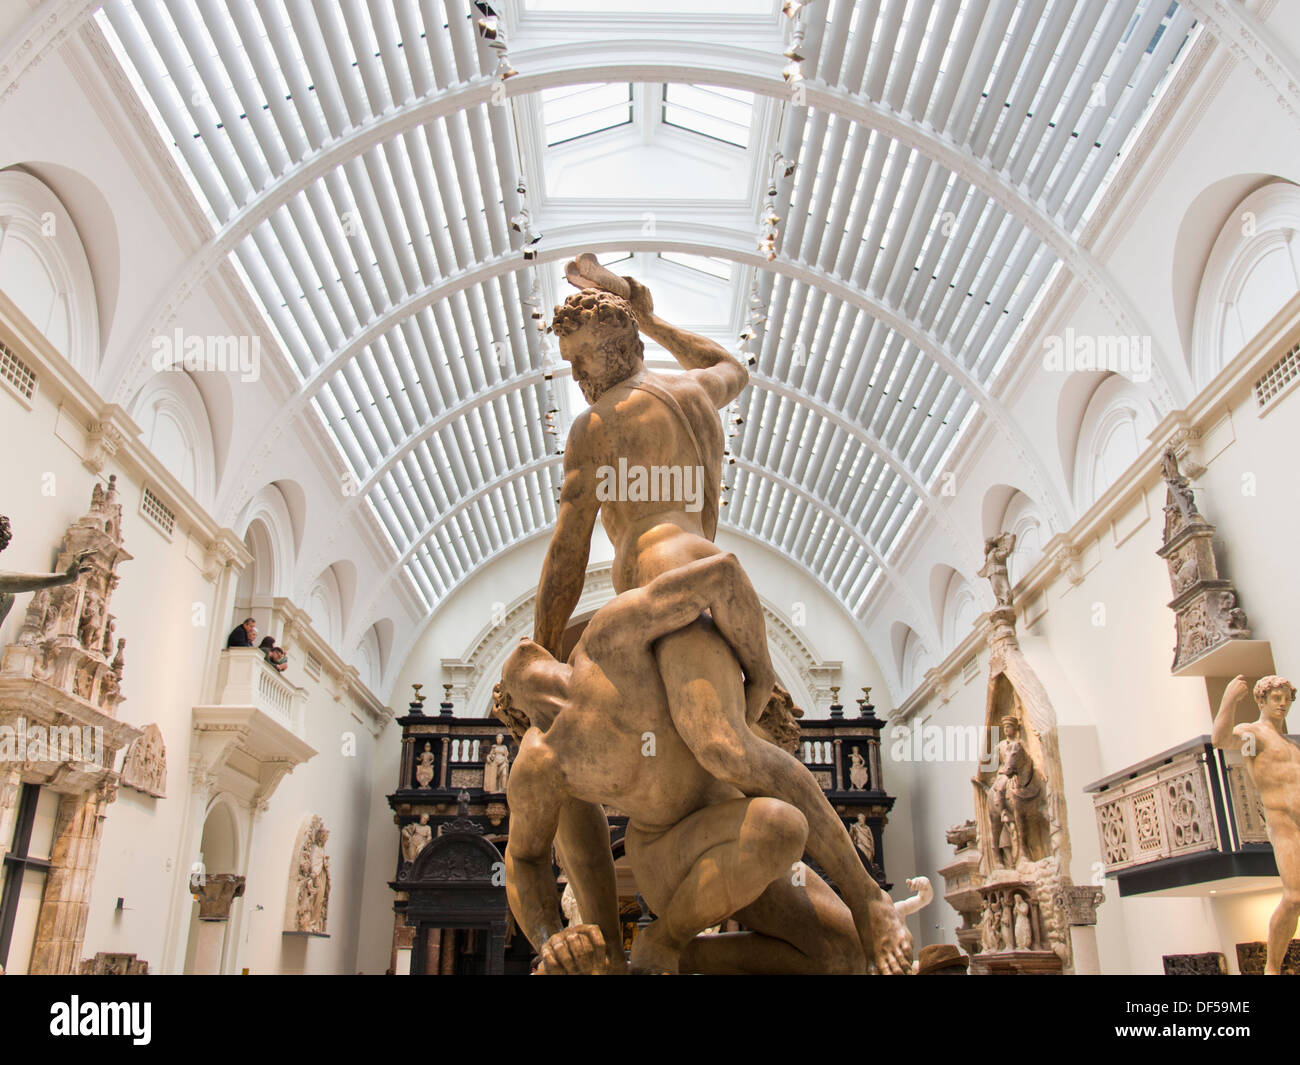 The Victoria and Albert Museum, London - statue of Samson slaying a Philistine in the new Renaissance Gallery 1 Stock Photo